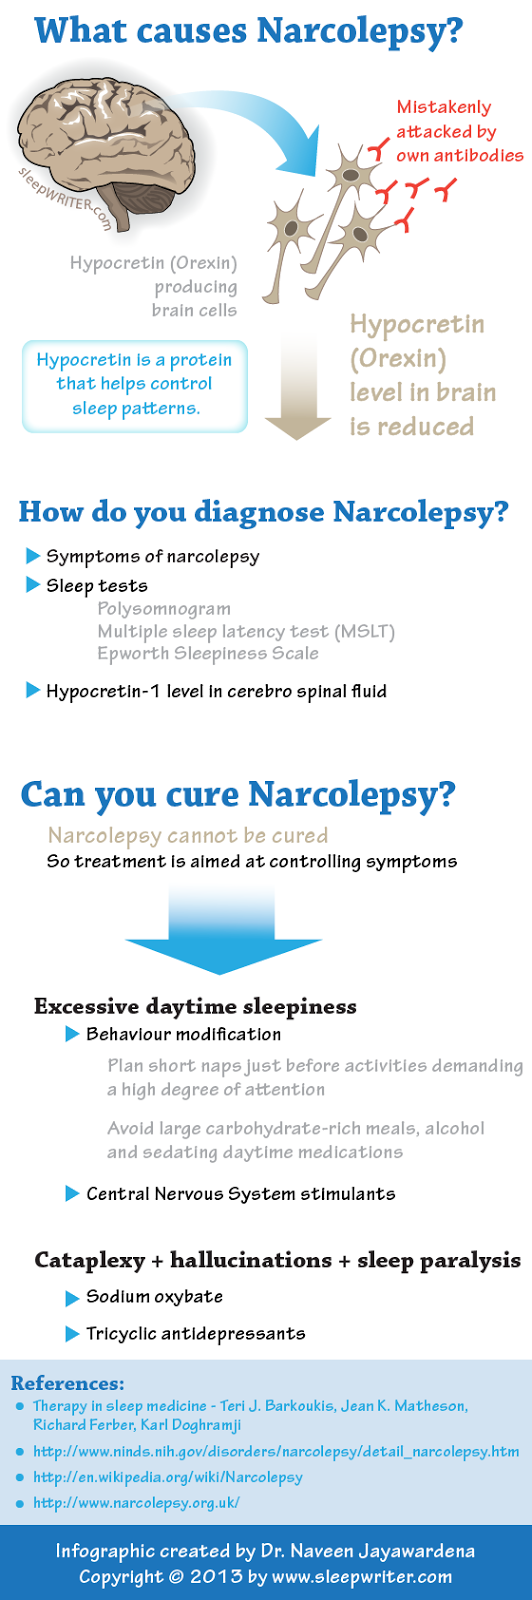 Cause of Narcolepsy